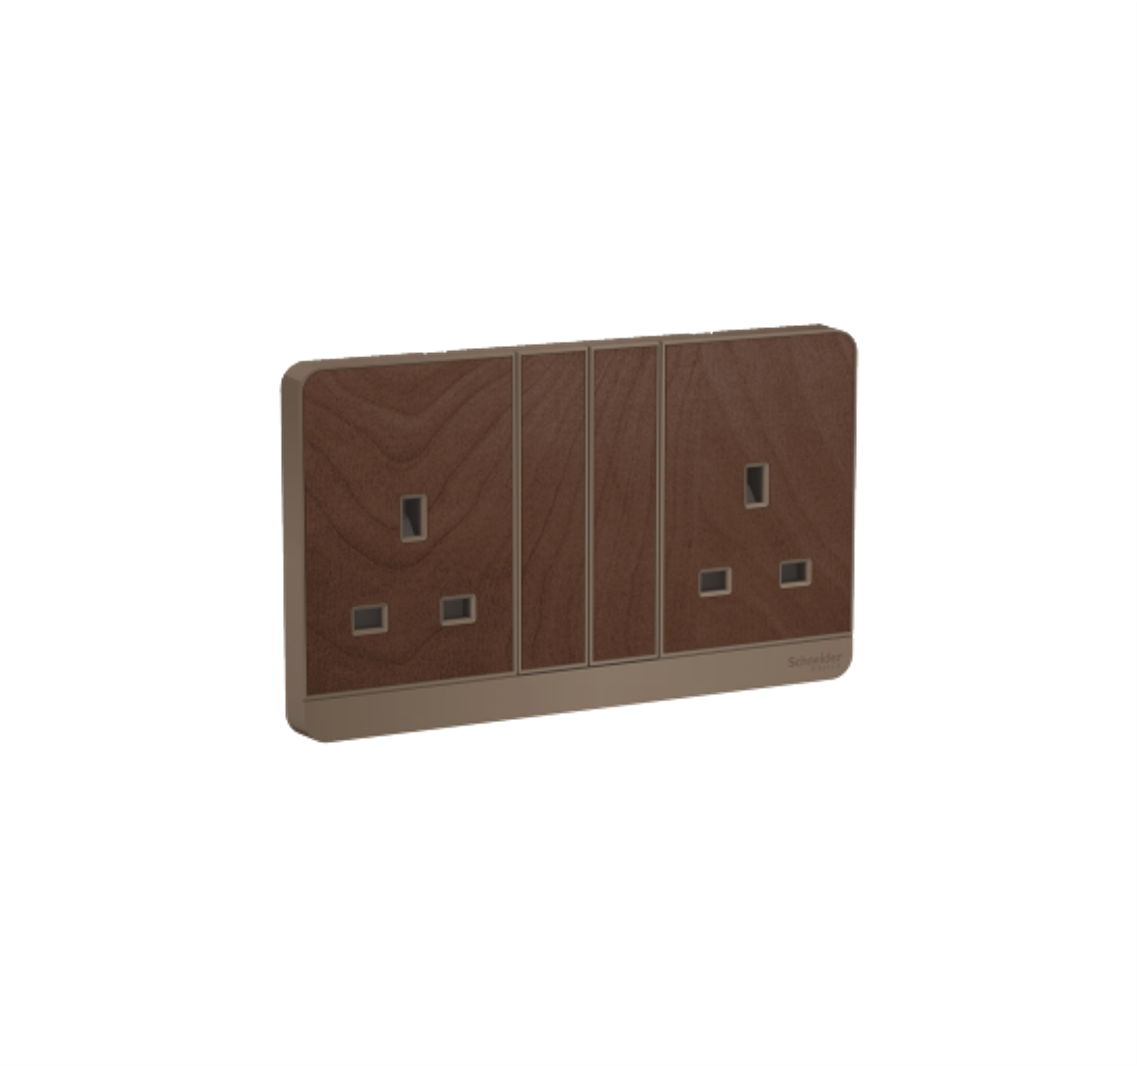 AvatarOn - 13A 250V Twin Gang Switched Socket with LED (Dark Wood)